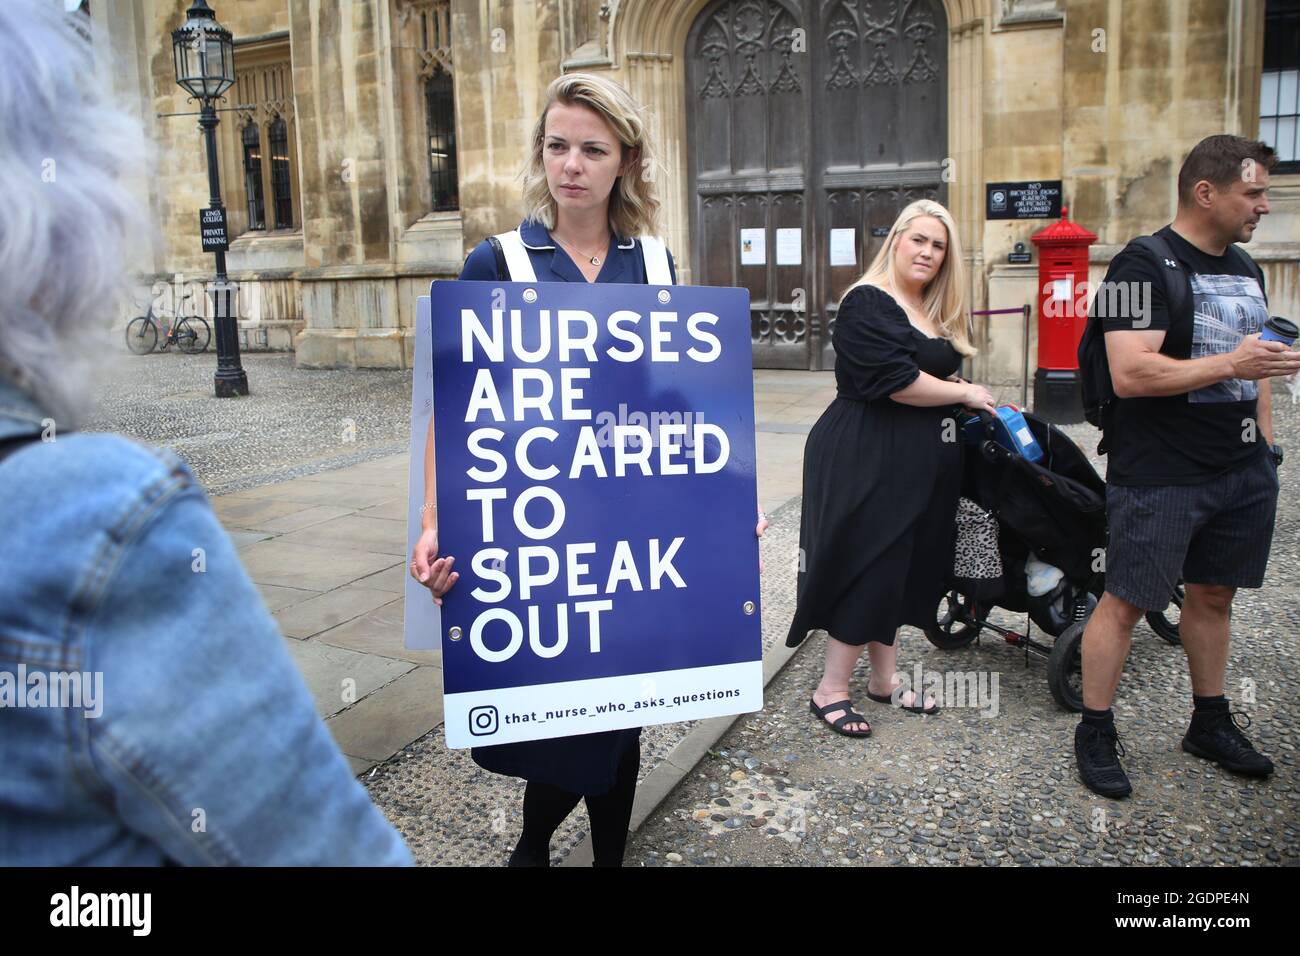 Nurse, Jenna Platt talks to supporters and members of the public at Kings College, Cambridge as she reaches her landmark 50th UK city.Jenna is currently walking around the UK wearing a sandwich board that encourages debate, visiting all 69 cities to highlight how Covid care has left nurses unhappy and too scared to question policy for fear of losing their jobs. Some health workers have spoken of bullying, coercion and being ostracised. Many feel if they ask questions, they are seen as being part of the problem. Jenna delivered a letter of complaint to The Nursing Midwifery Council in London be Stock Photo